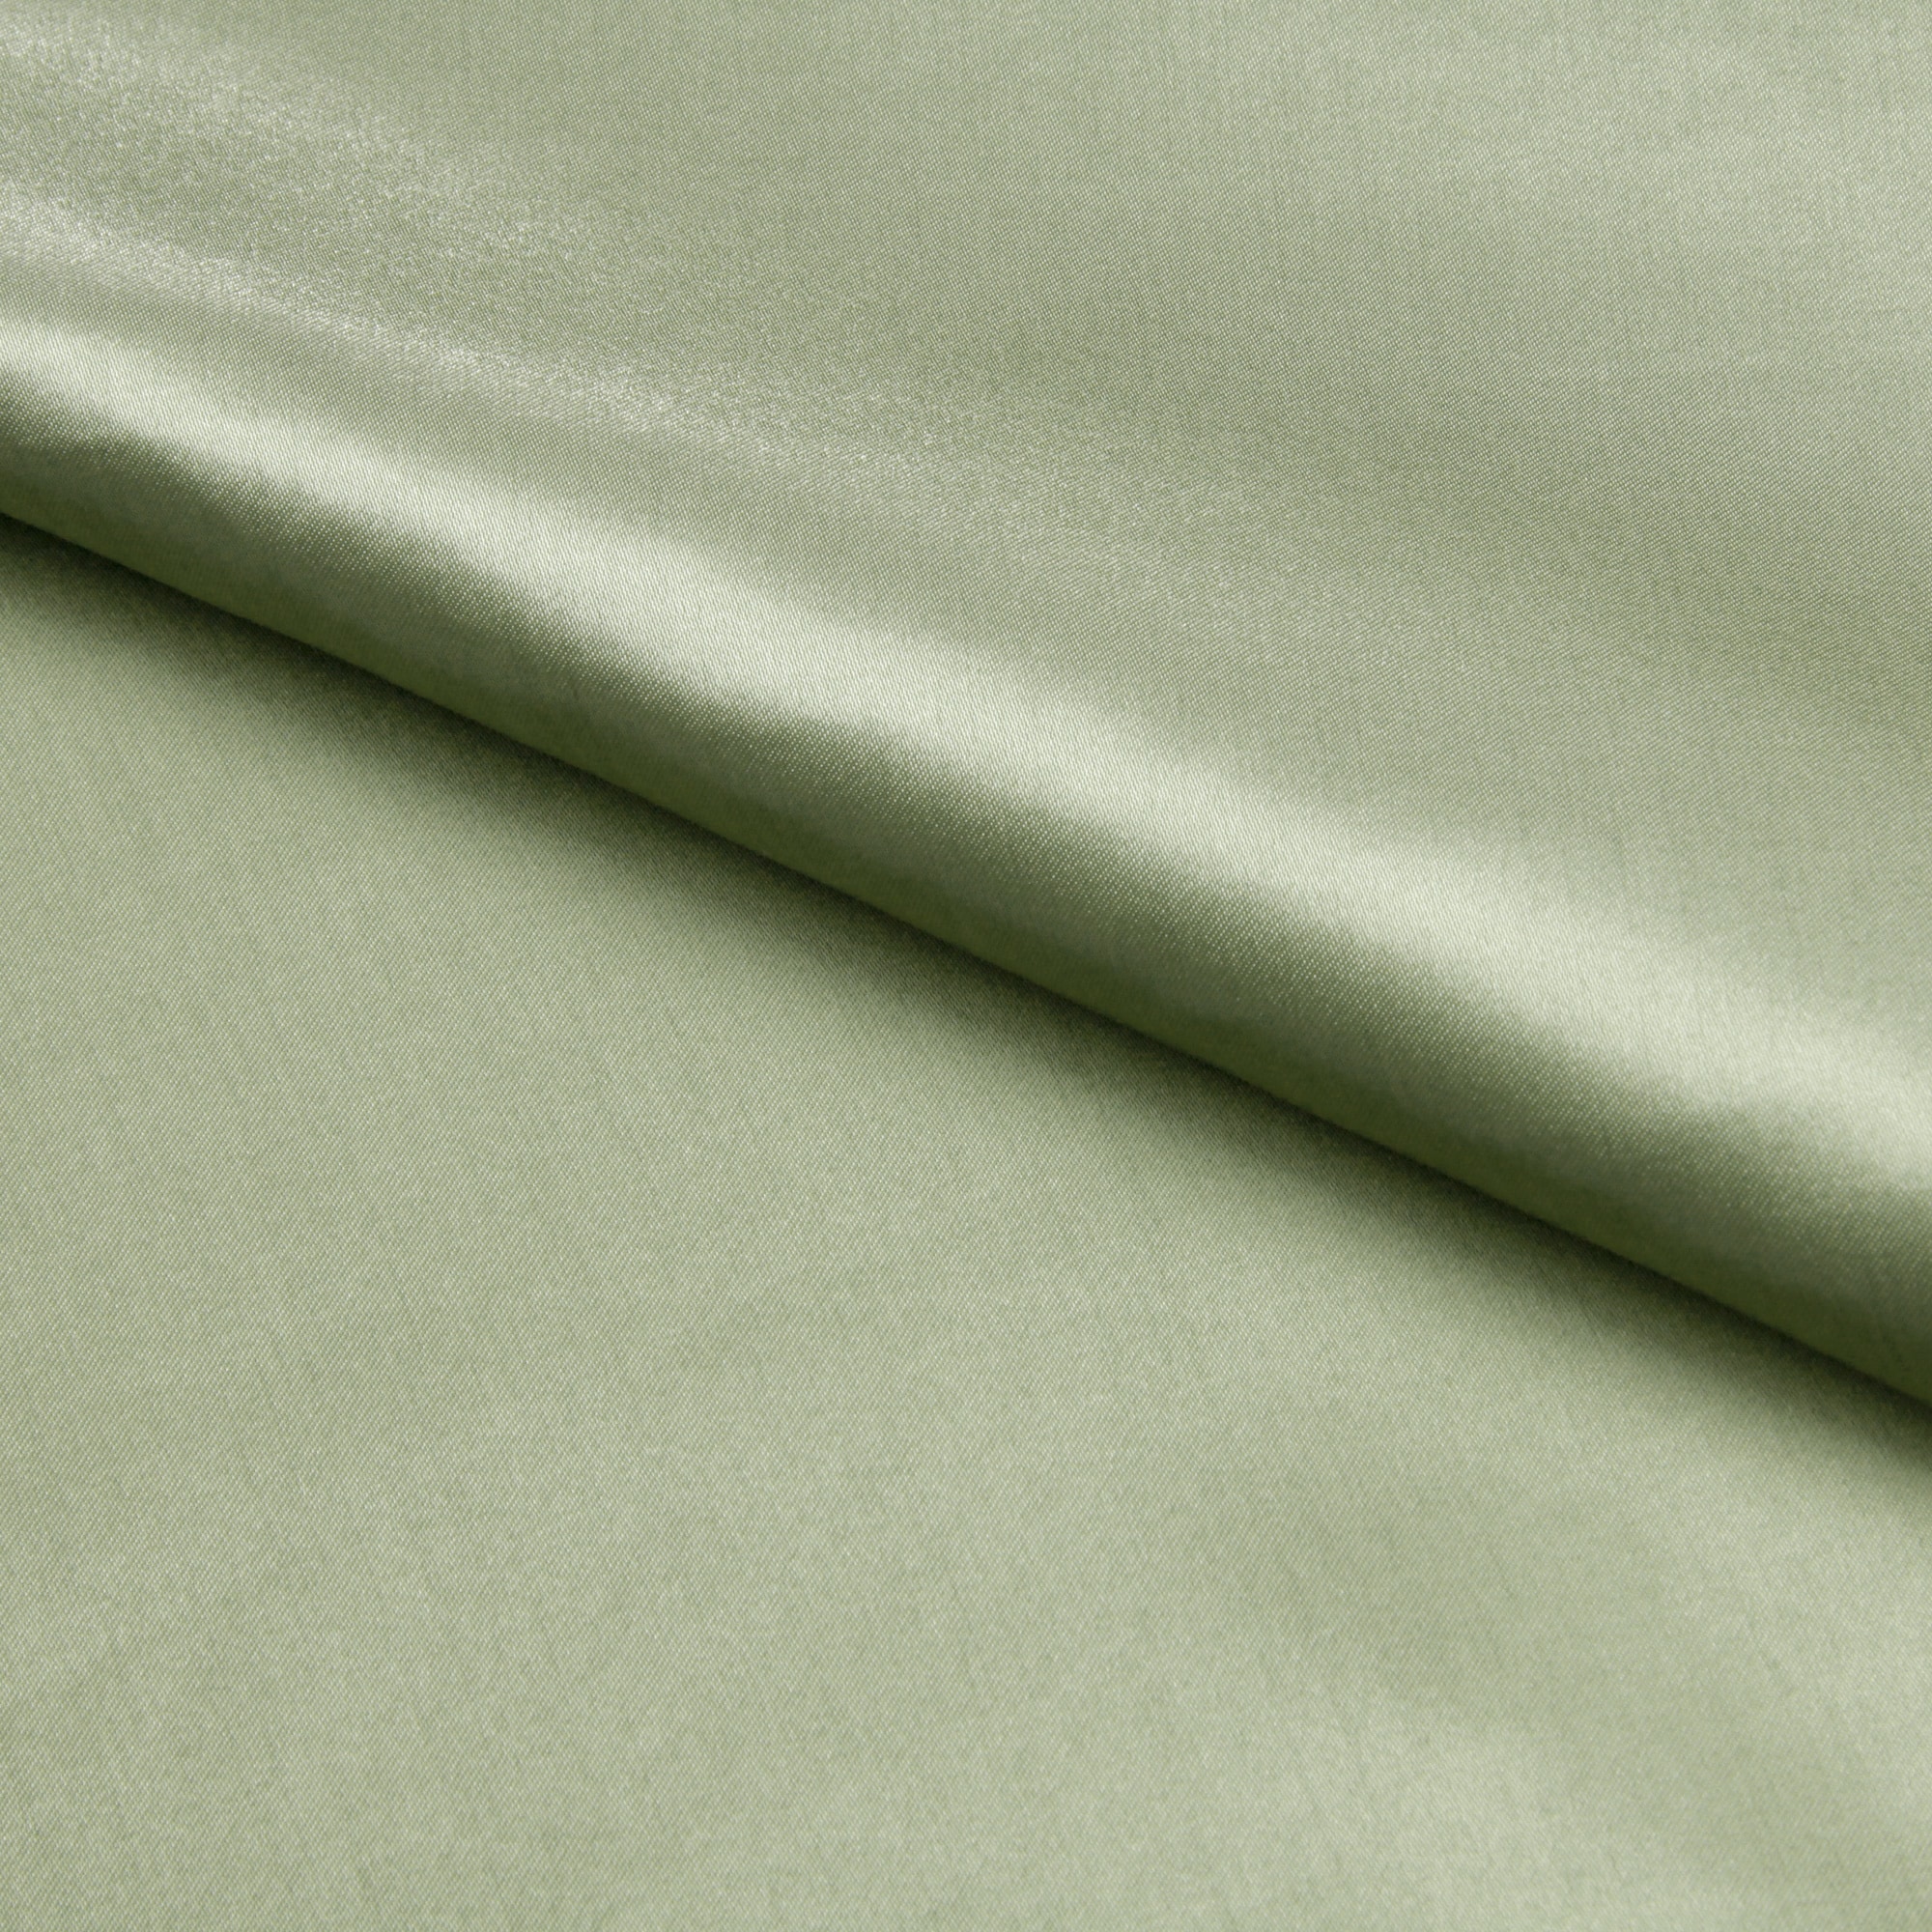 Innomax Convert a fit Satin Sheet Set   Fitted And Flat Sheet Are Attached. Green Size King